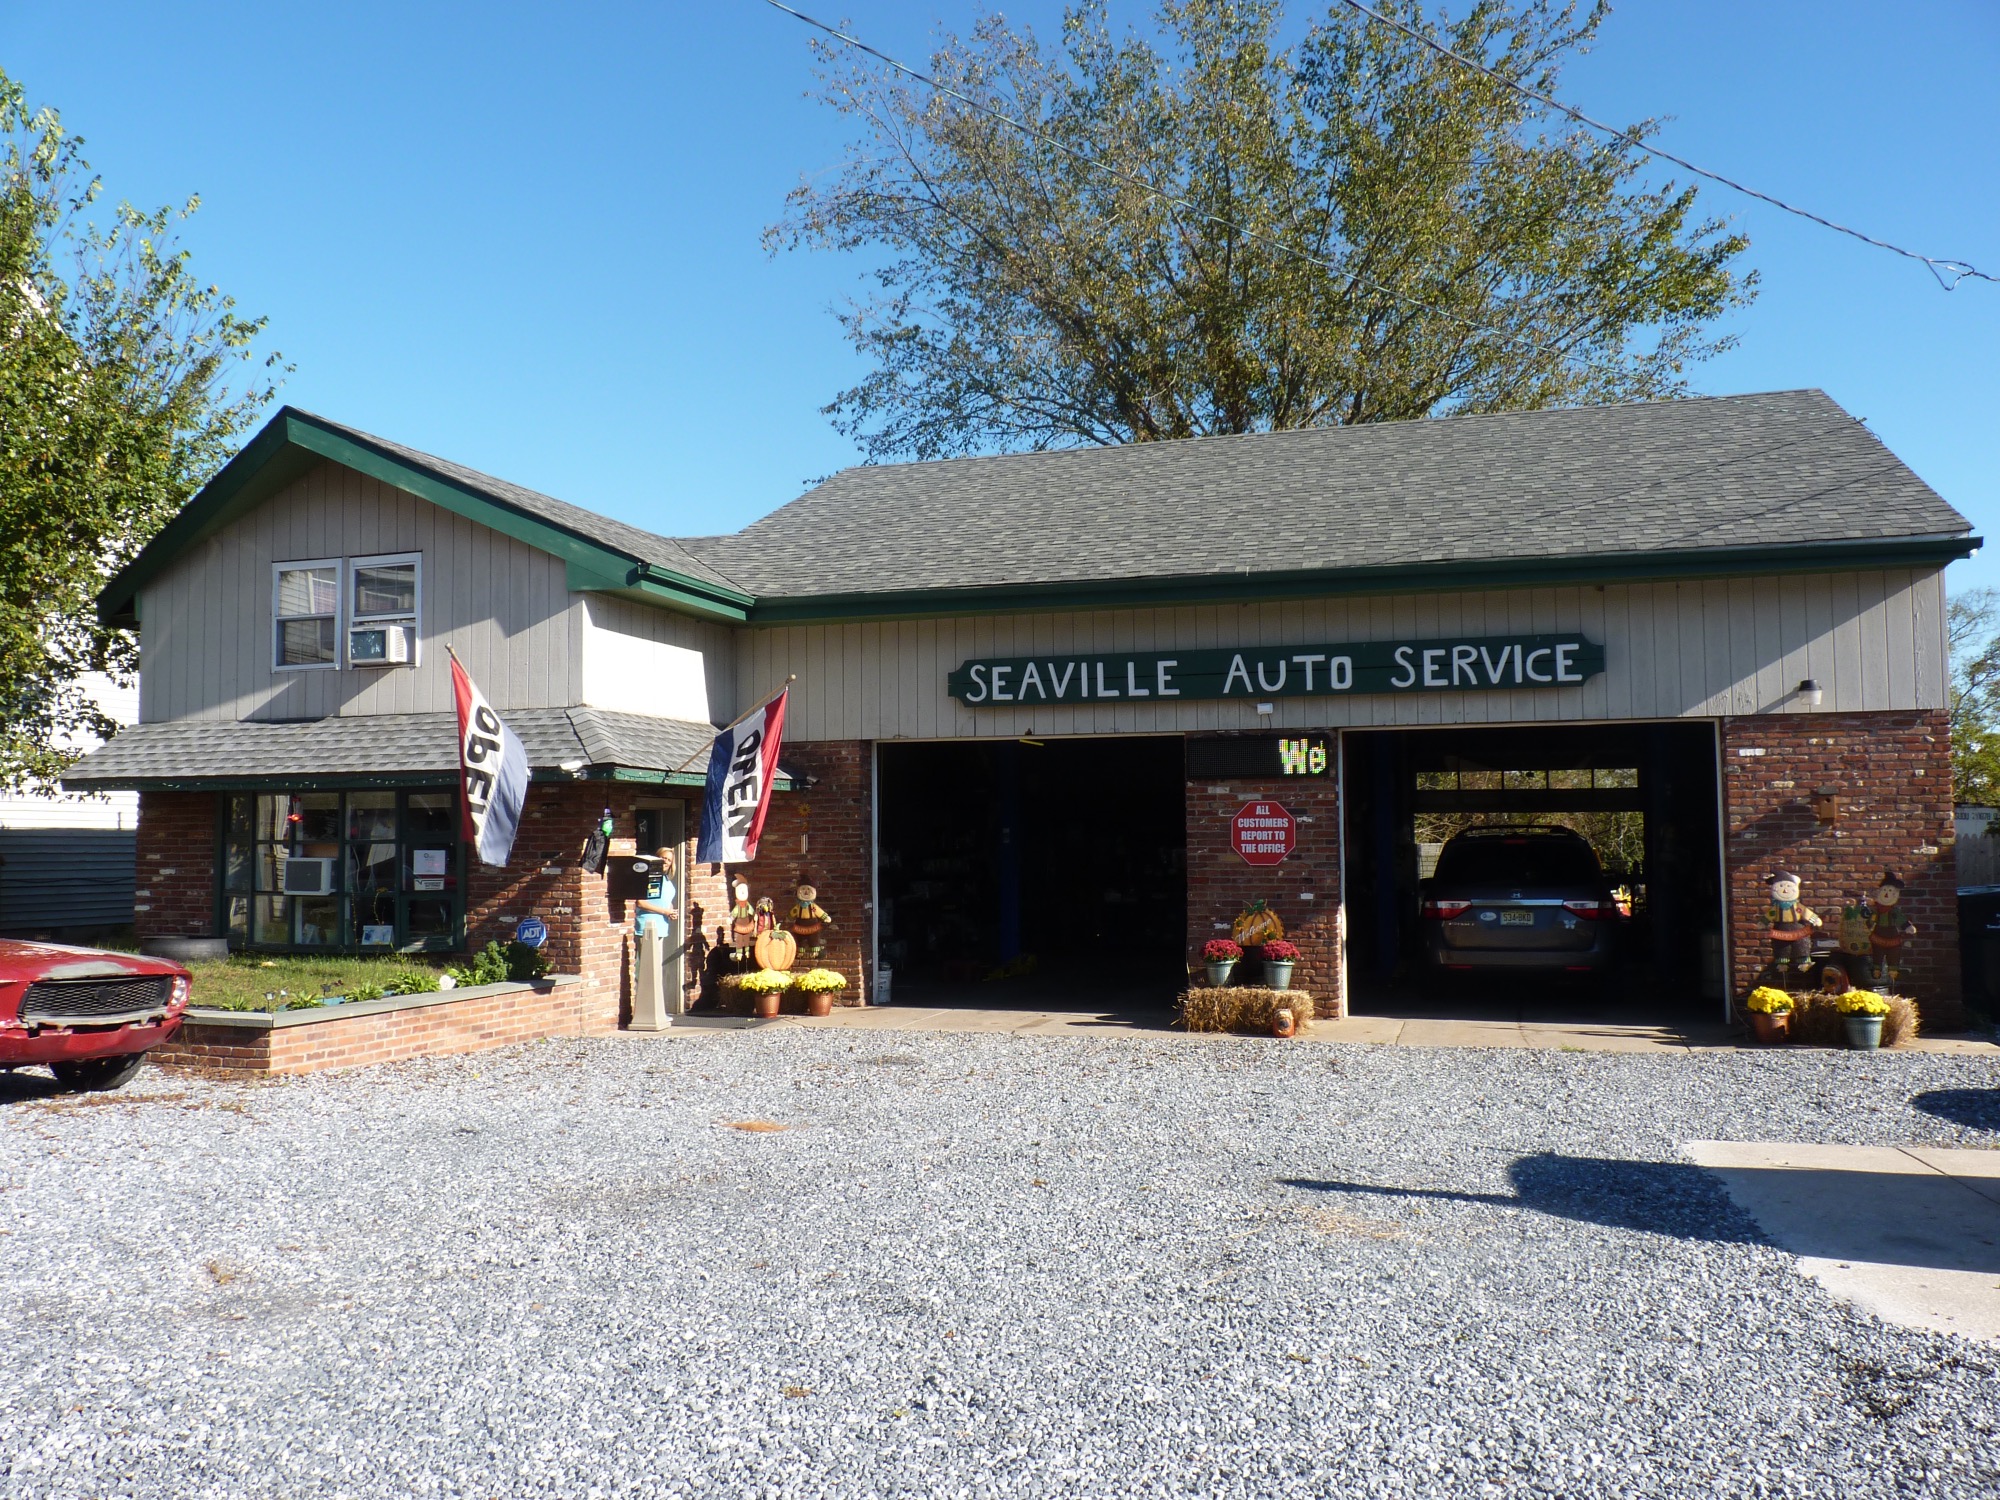 Seaville Auto Keeps You Rollin’ Down the Road!